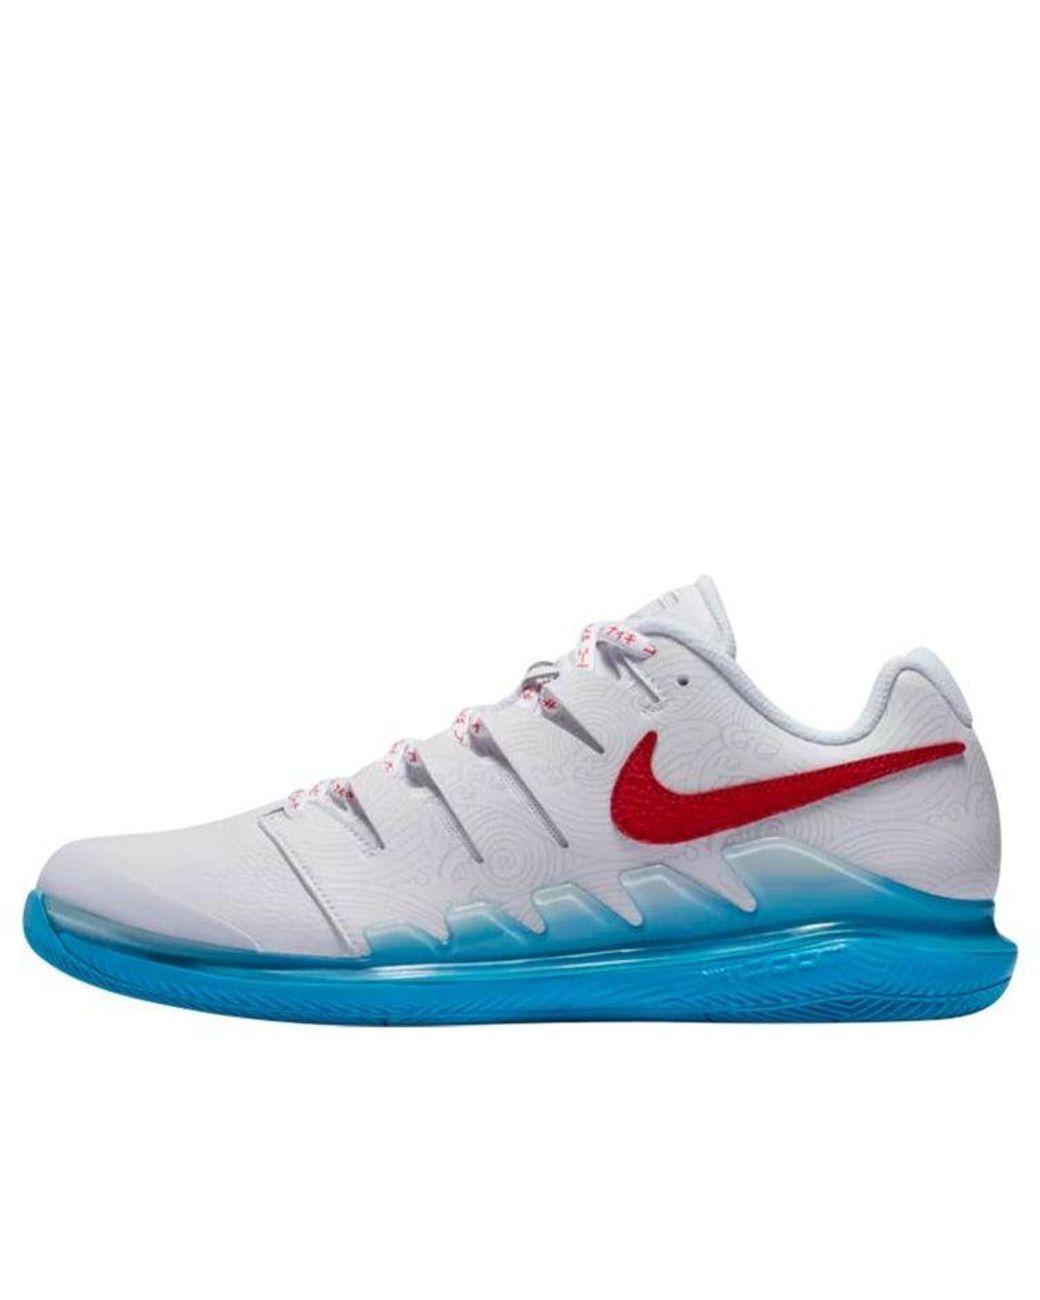 Nike Air Zoom Vapor X Ltr Leather Tennis Shoes White/blue/red for Men | Lyst